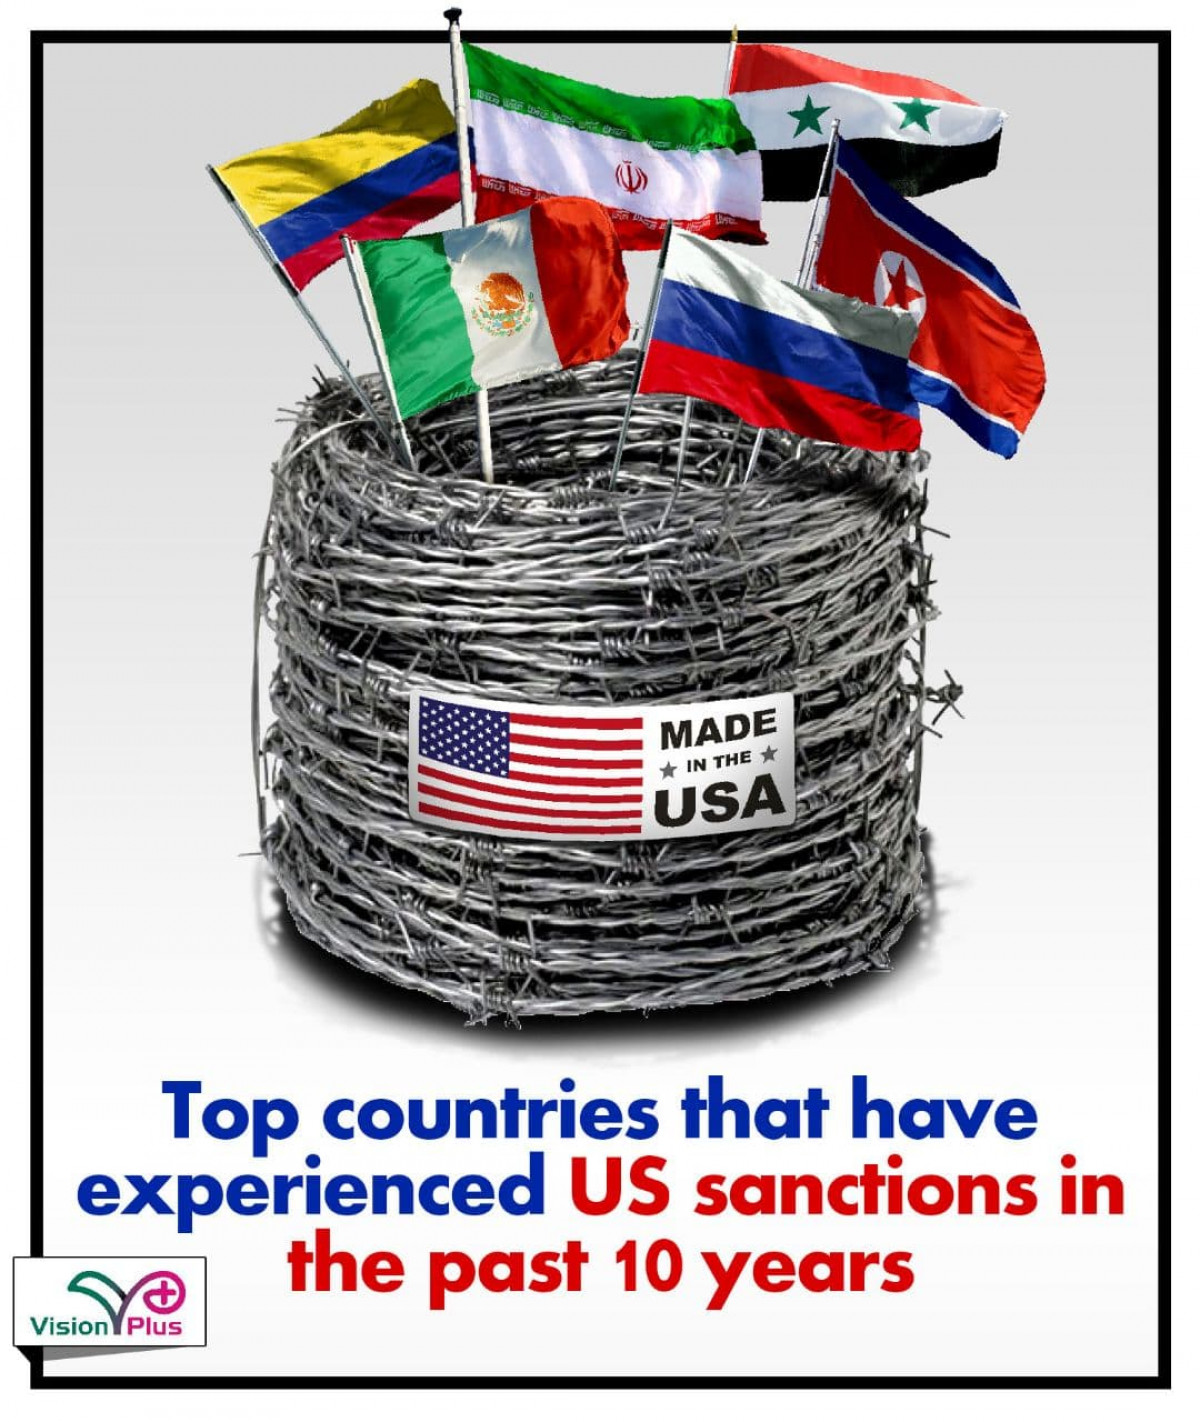 Top countries that have experienced US sanctions in the past 10 years